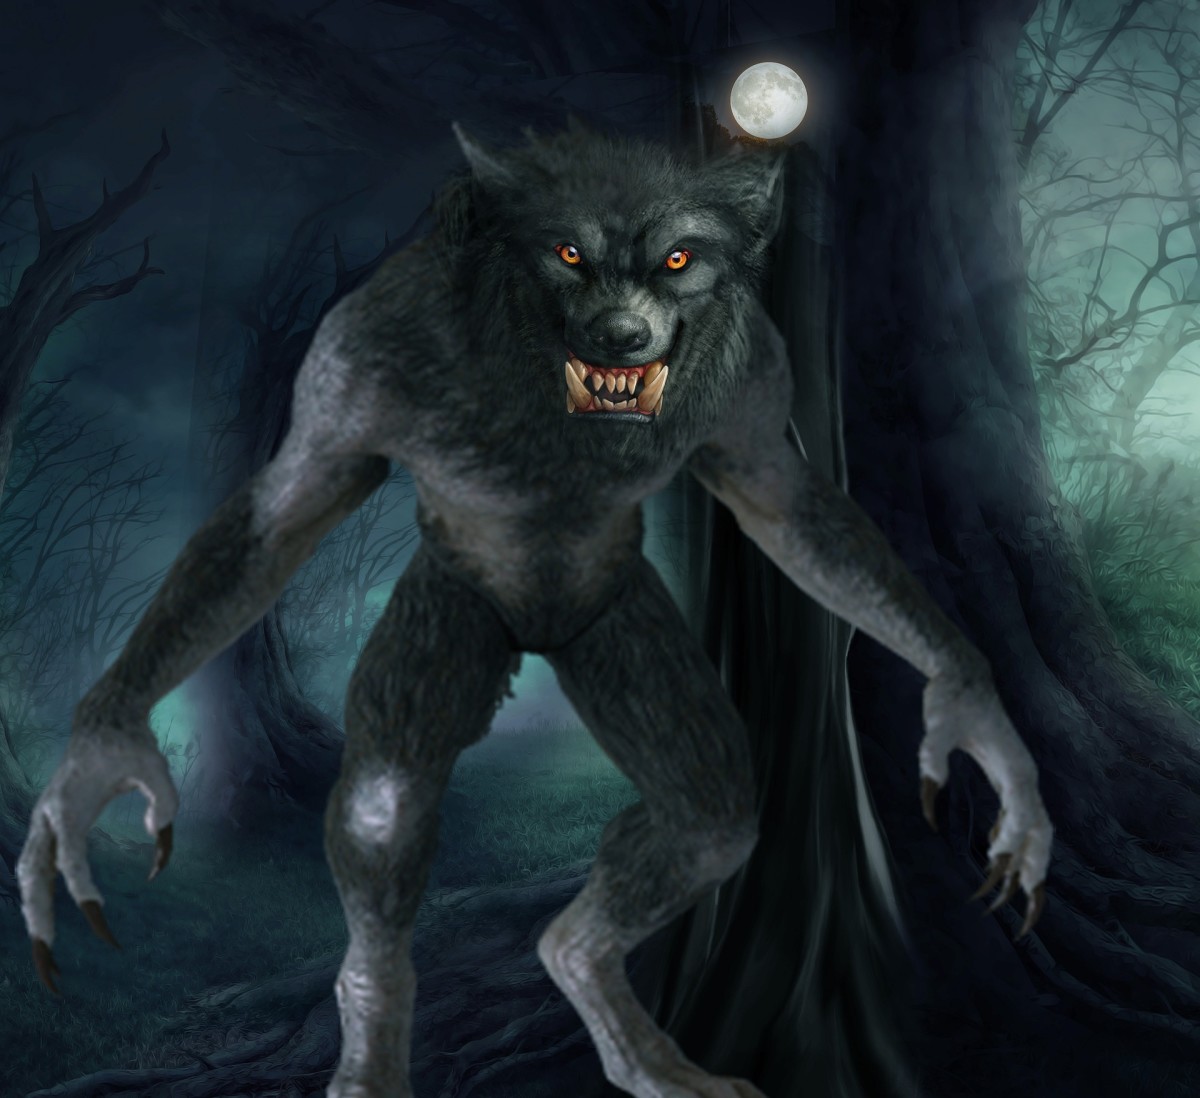 Werewolves are a widespread feature of European mythology. A werewolf is a human who is afflicted either with a curse or spell that makes them turn into a hybrid man-wolf during the full moon. Belief in werewolves developed during the Middle Ages.